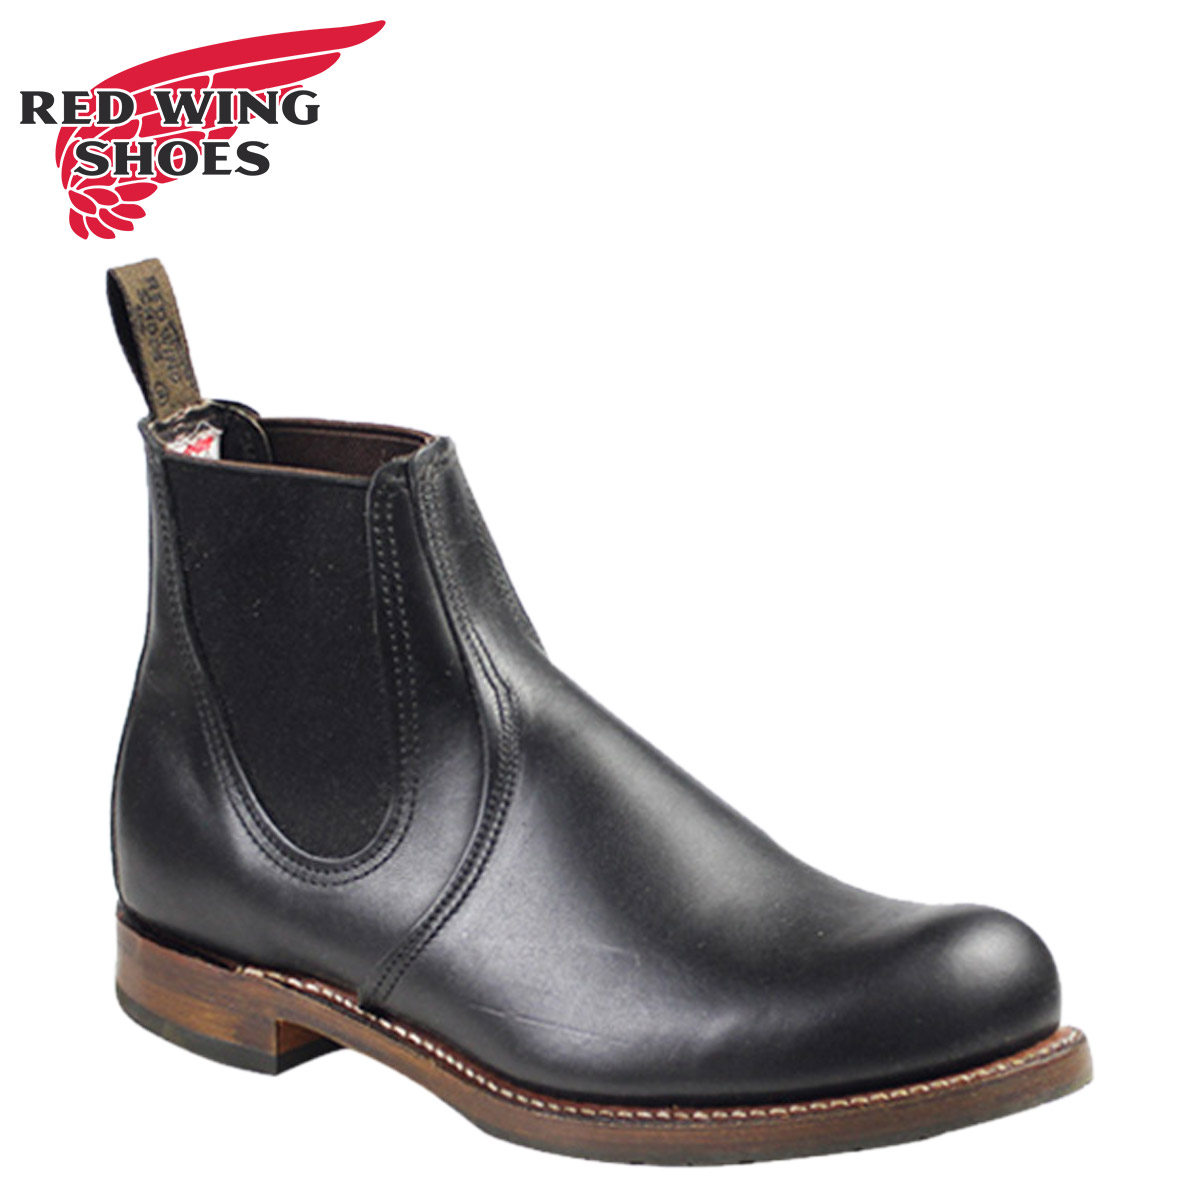 redwing chelsea boots